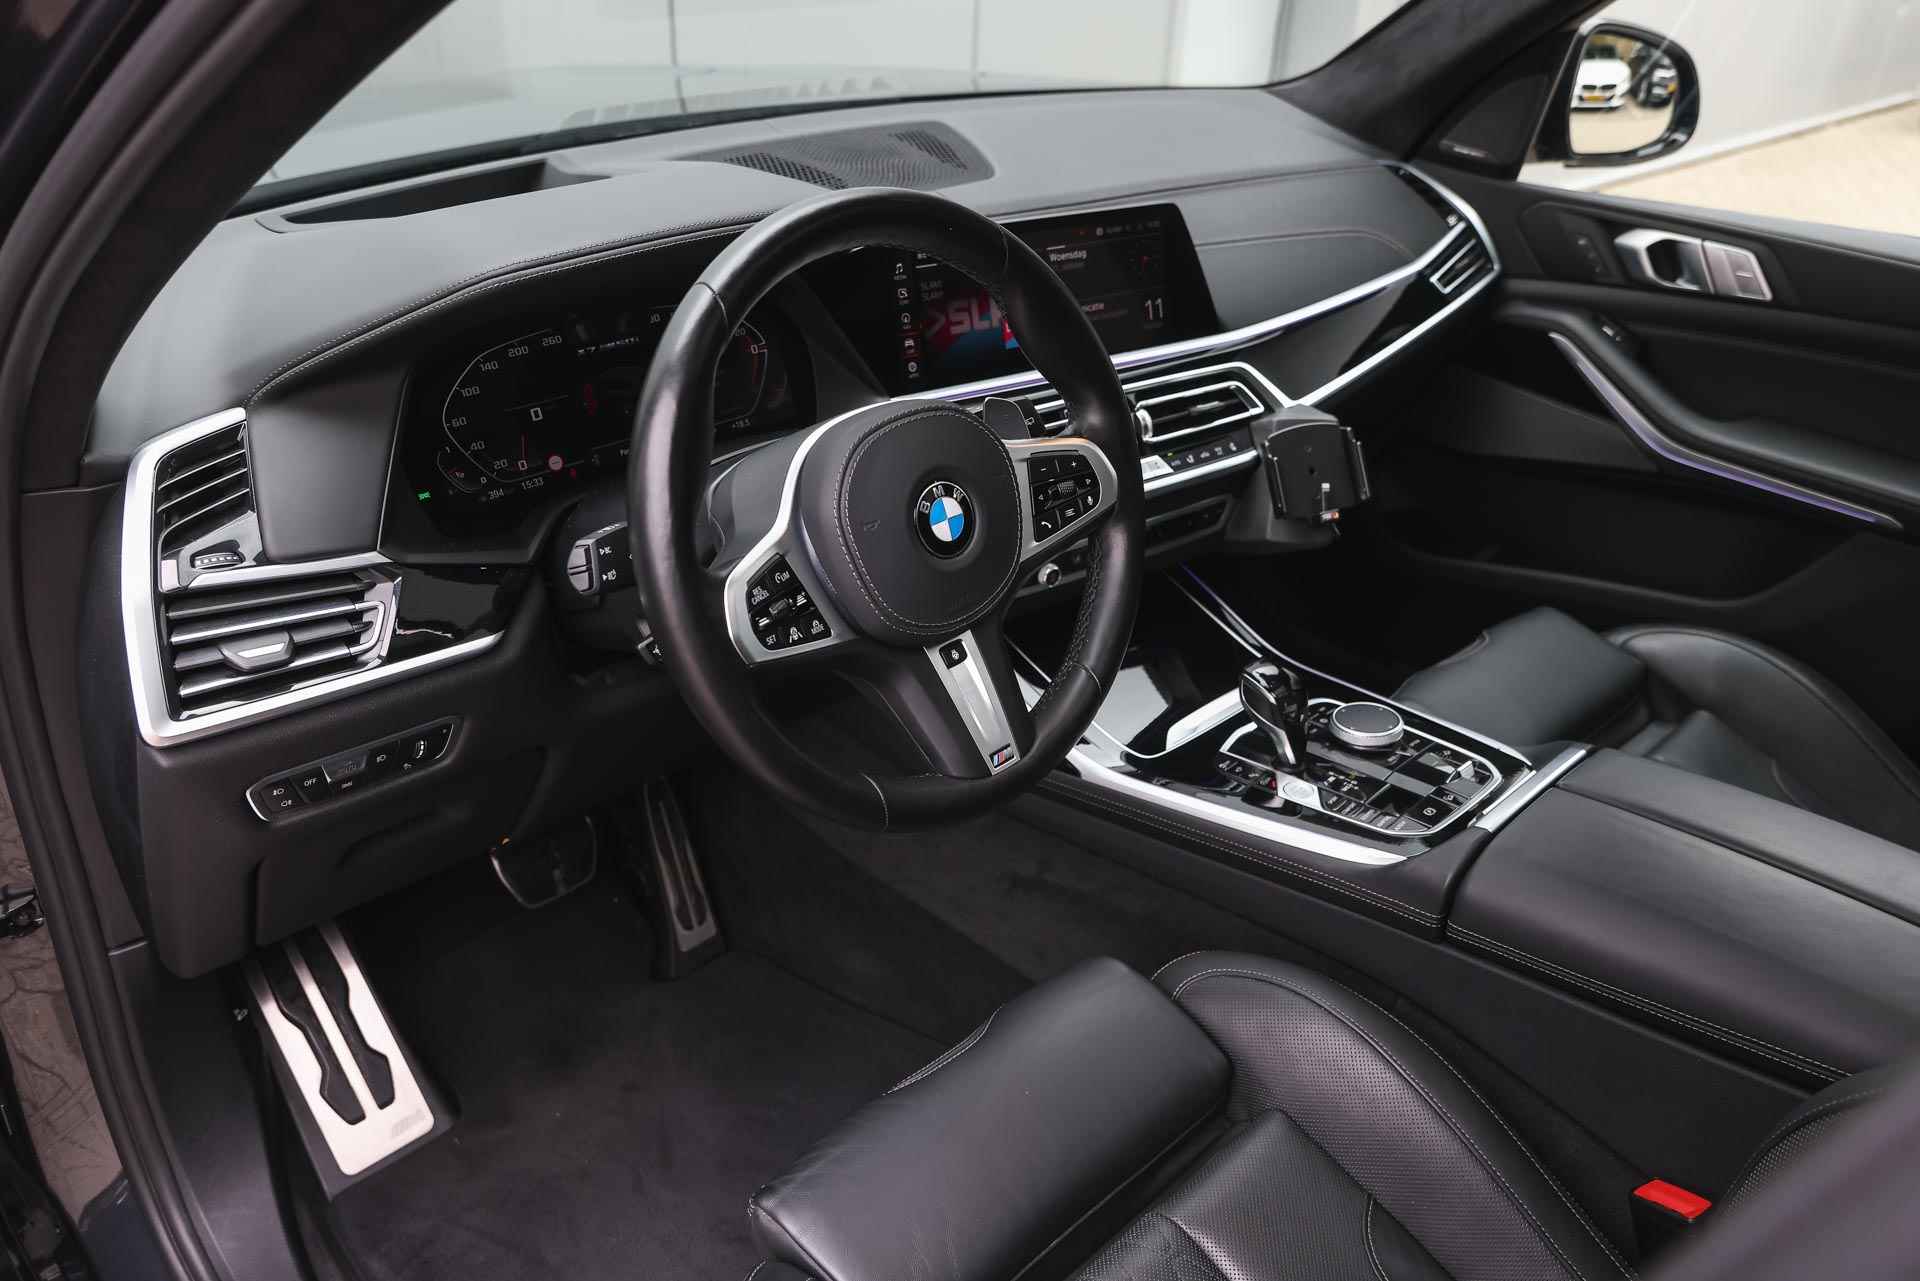 BMW X7 M50i High Executive Automaat / Active Steering / Stoelventilatie / Laserlight / Soft Close / Head-Up / Gesture Control / Parking Assistant Plus / Alpina wielen 23 inch - 11/56